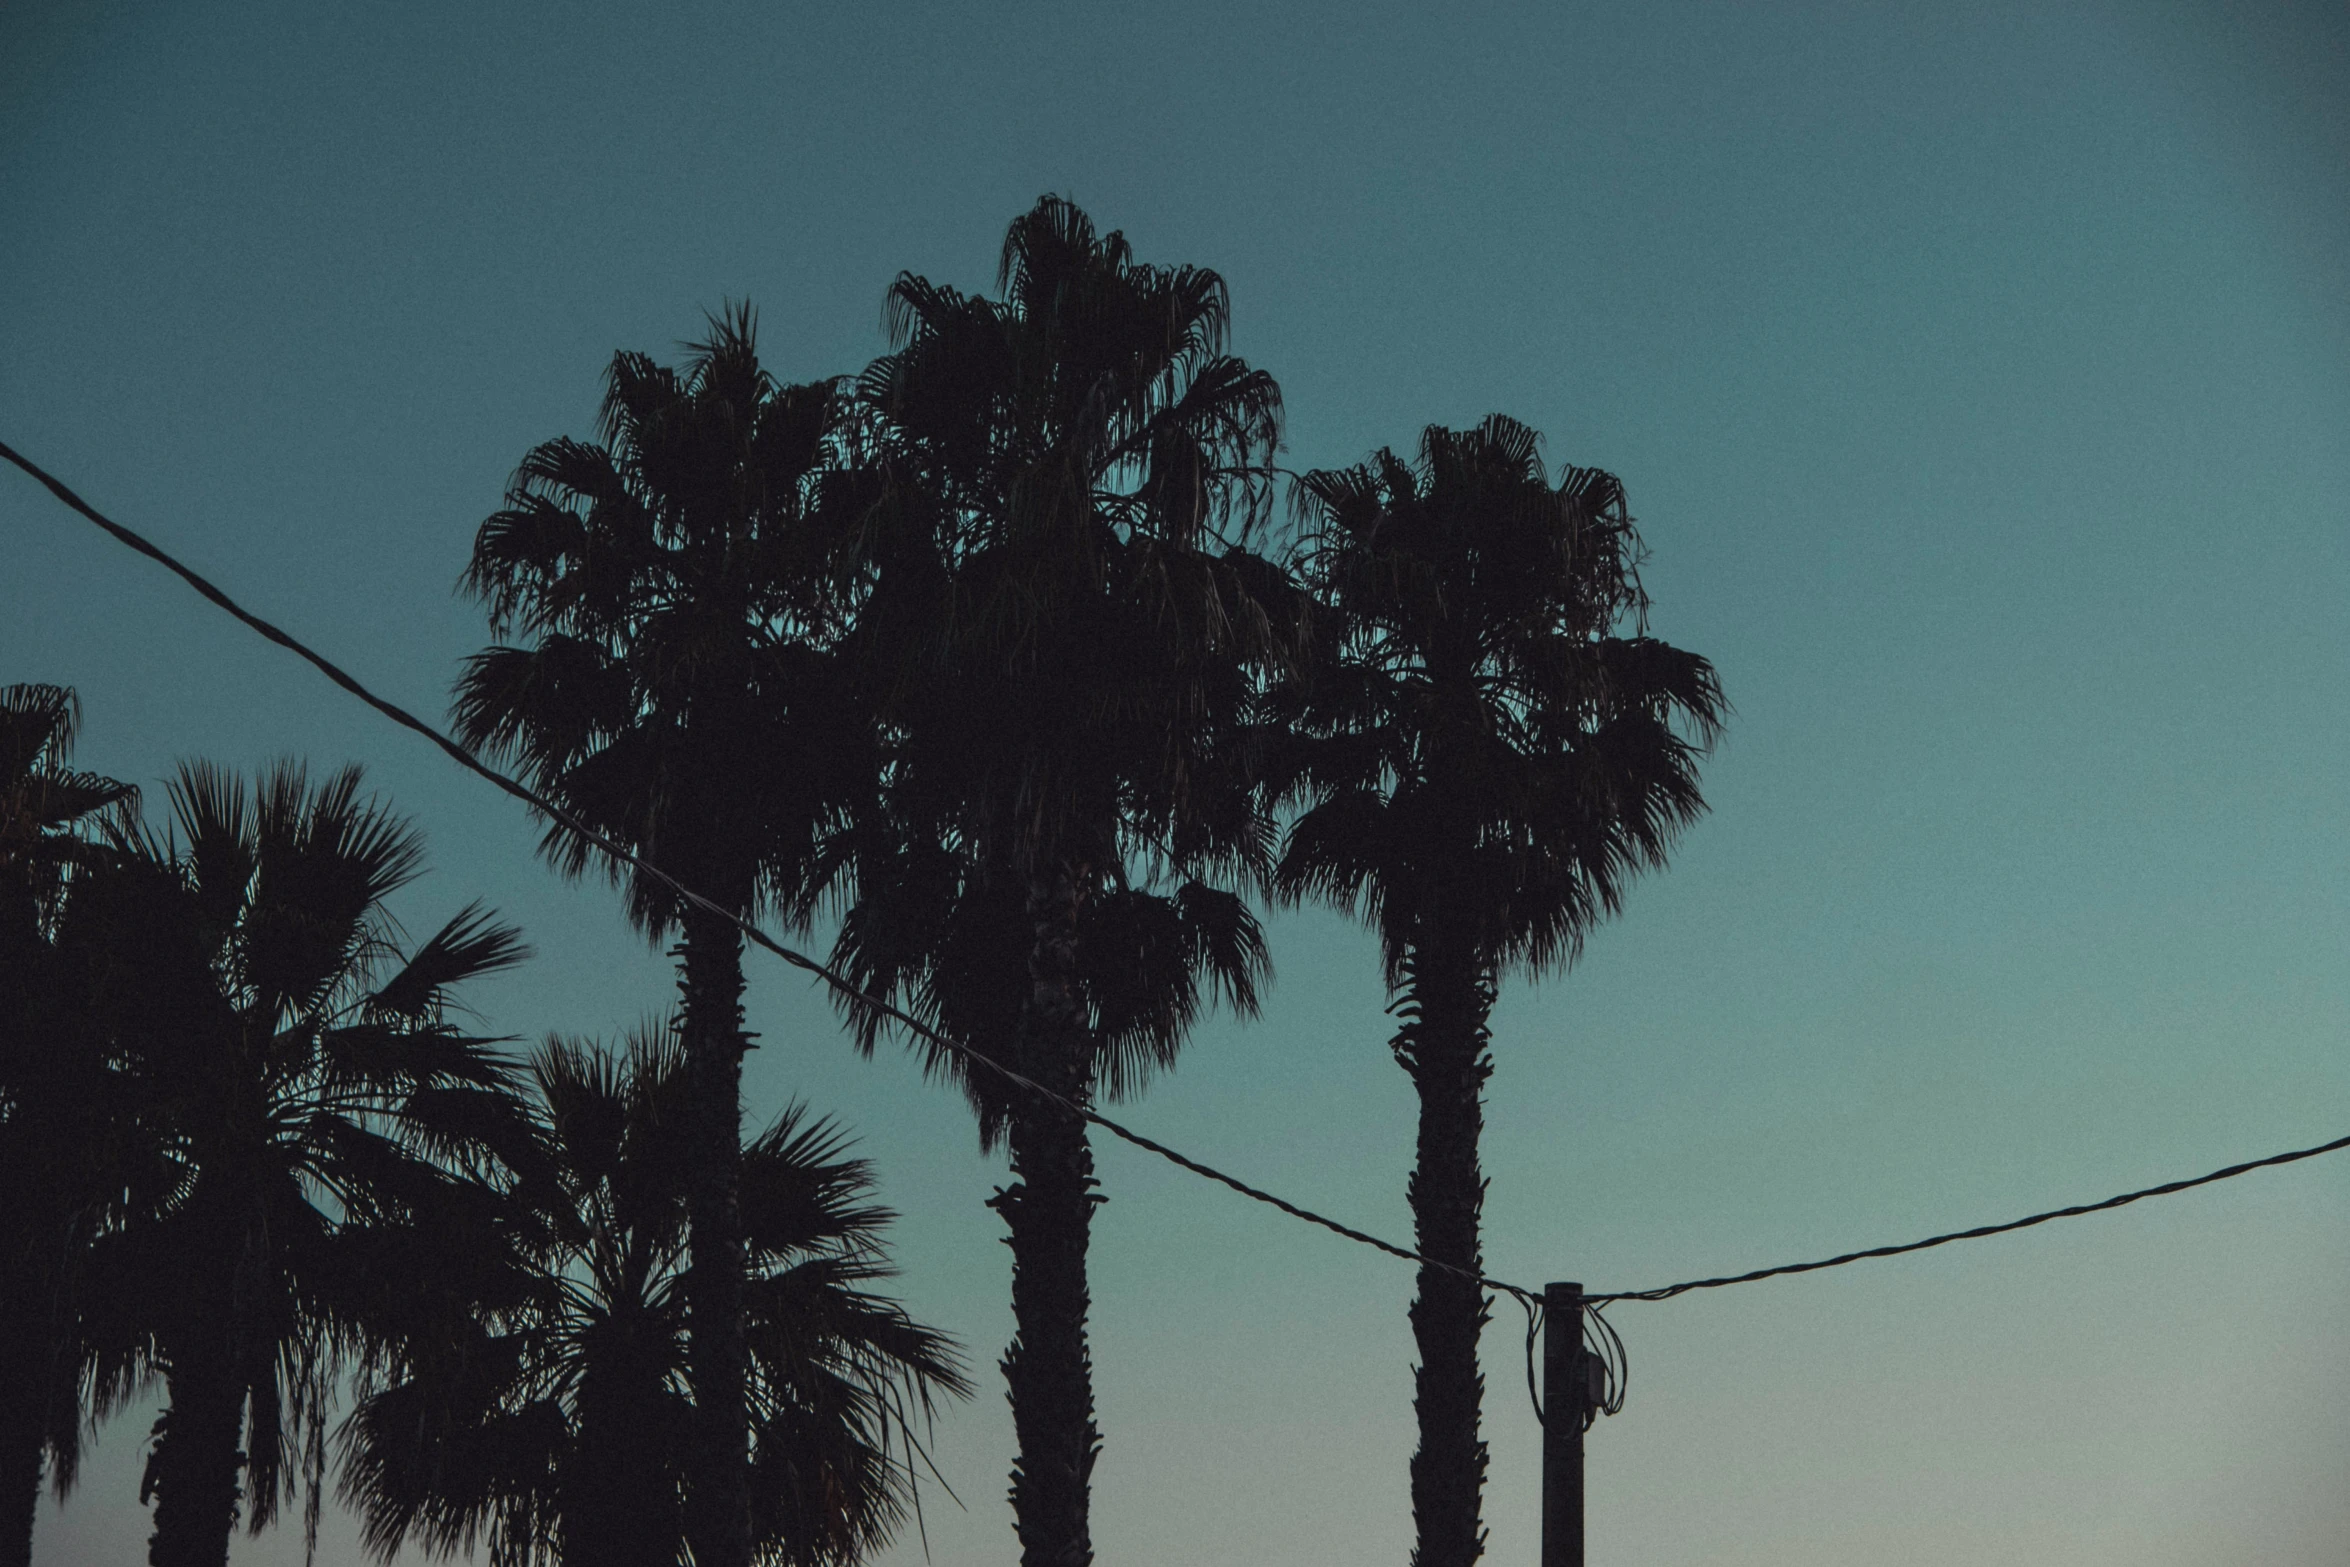 several palm trees in silhouette against a twilight sky